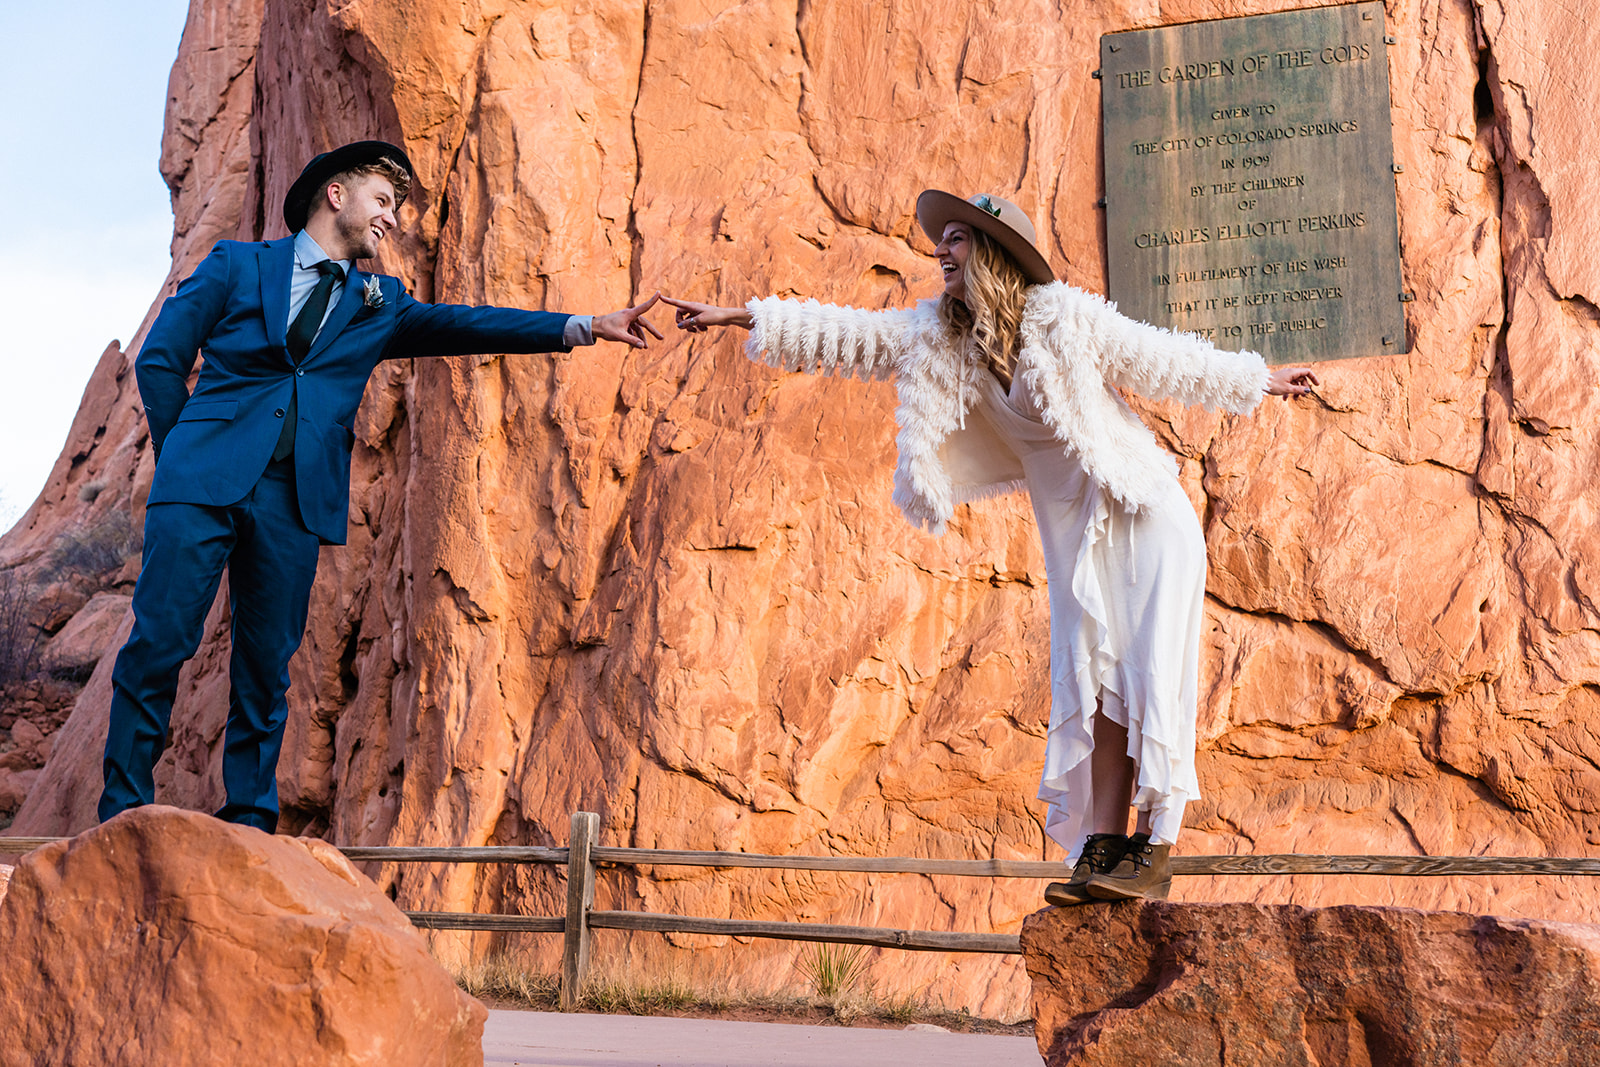 Newly engaged couple acting silly at the Garden of the Gods